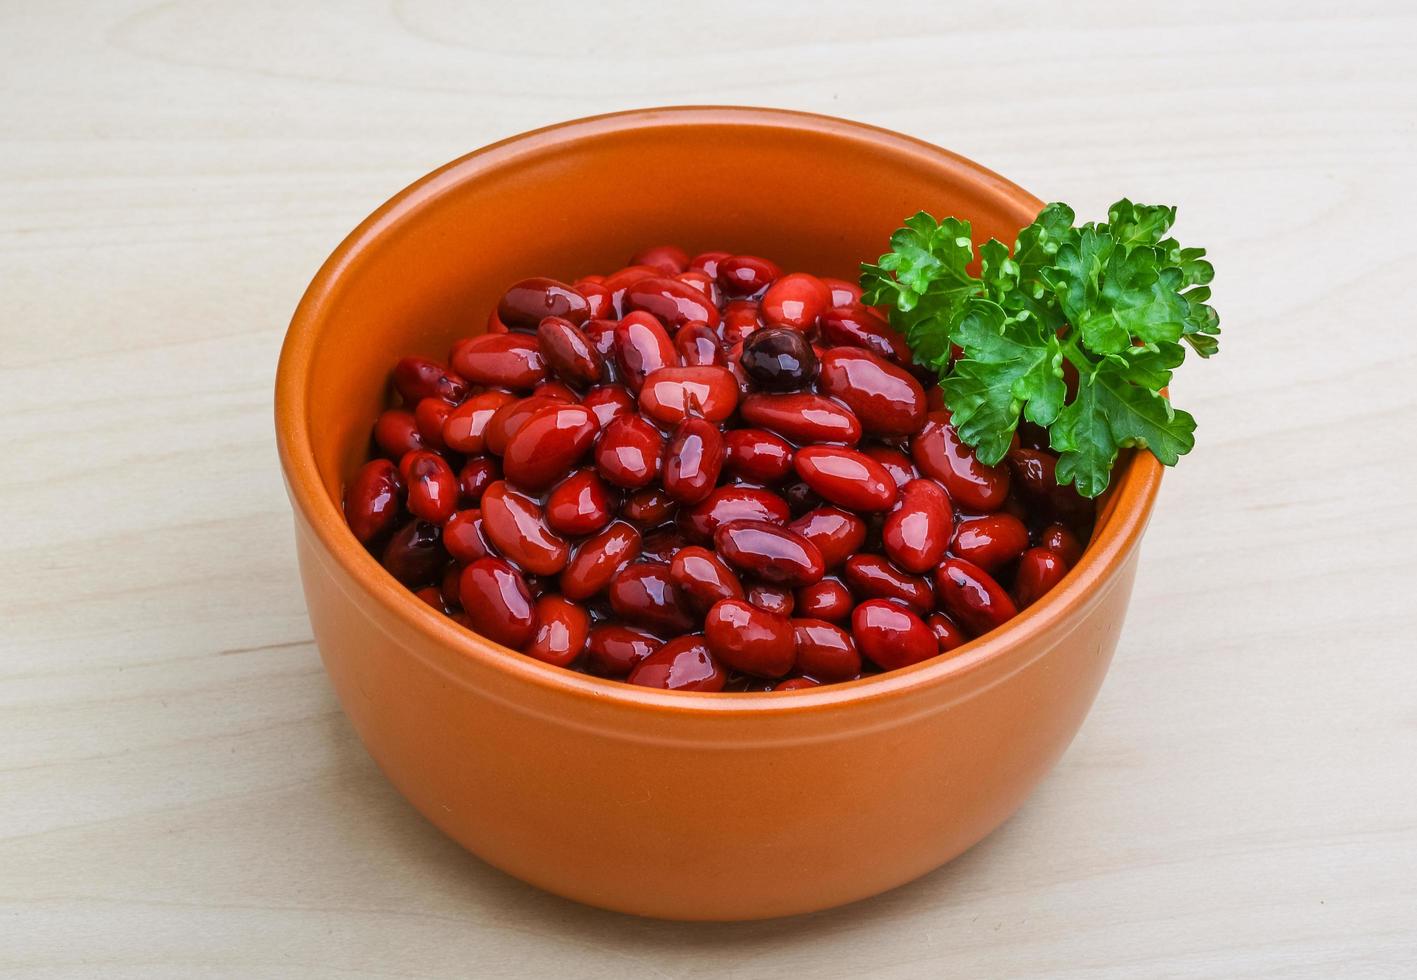 Baked beans in a bowl on wooden background photo